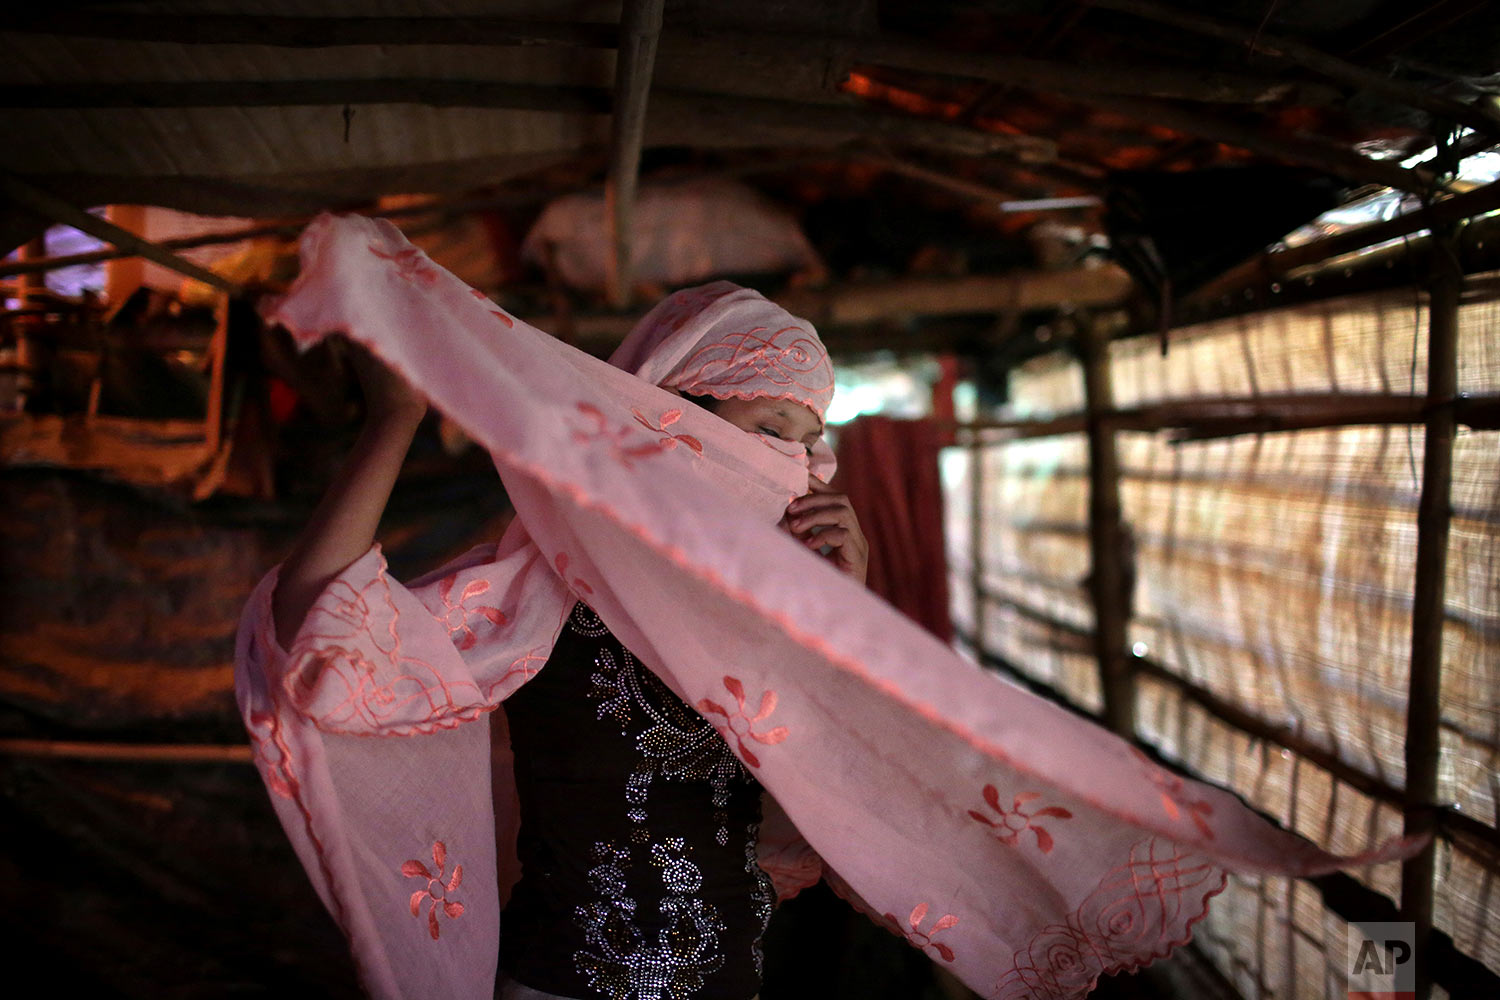  &nbsp;In this Sunday, Nov. 19, 2017, photo, R, 13, who says she was raped by members of Myanmar's armed forces in late August, adjusts her headscarf while photographed in her family's tent in Kutupalong refugee camp in Bangladesh. (AP Photo/Wong May